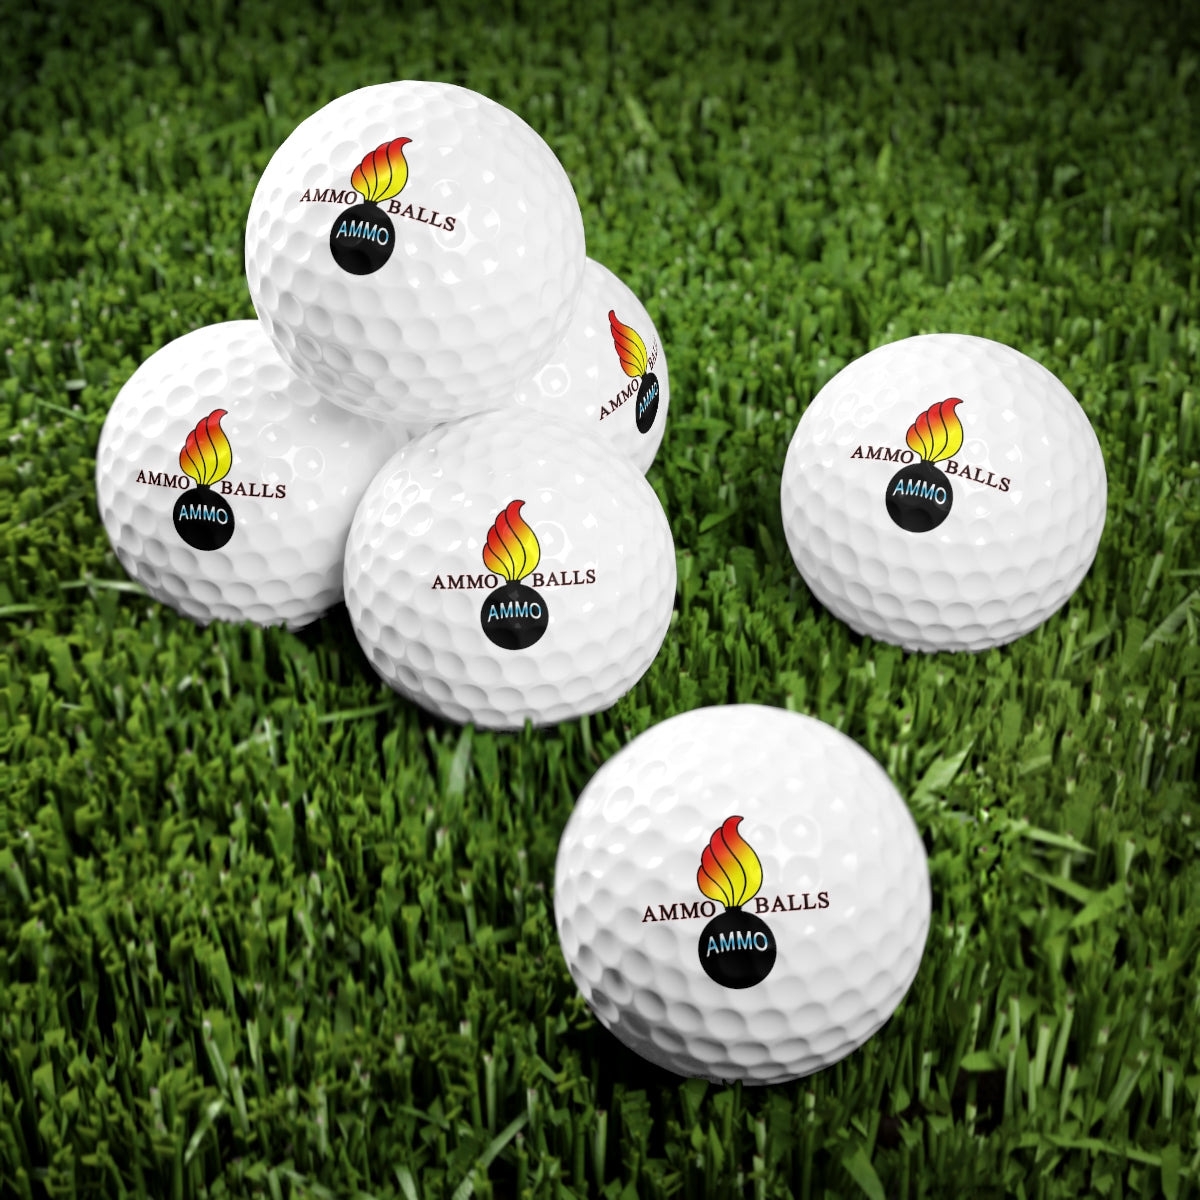 USAF AMMO Red and Yellow Flame Arched Word AMMO In Pisspot AMMO BALLS Logo Golf Balls, 6pcs